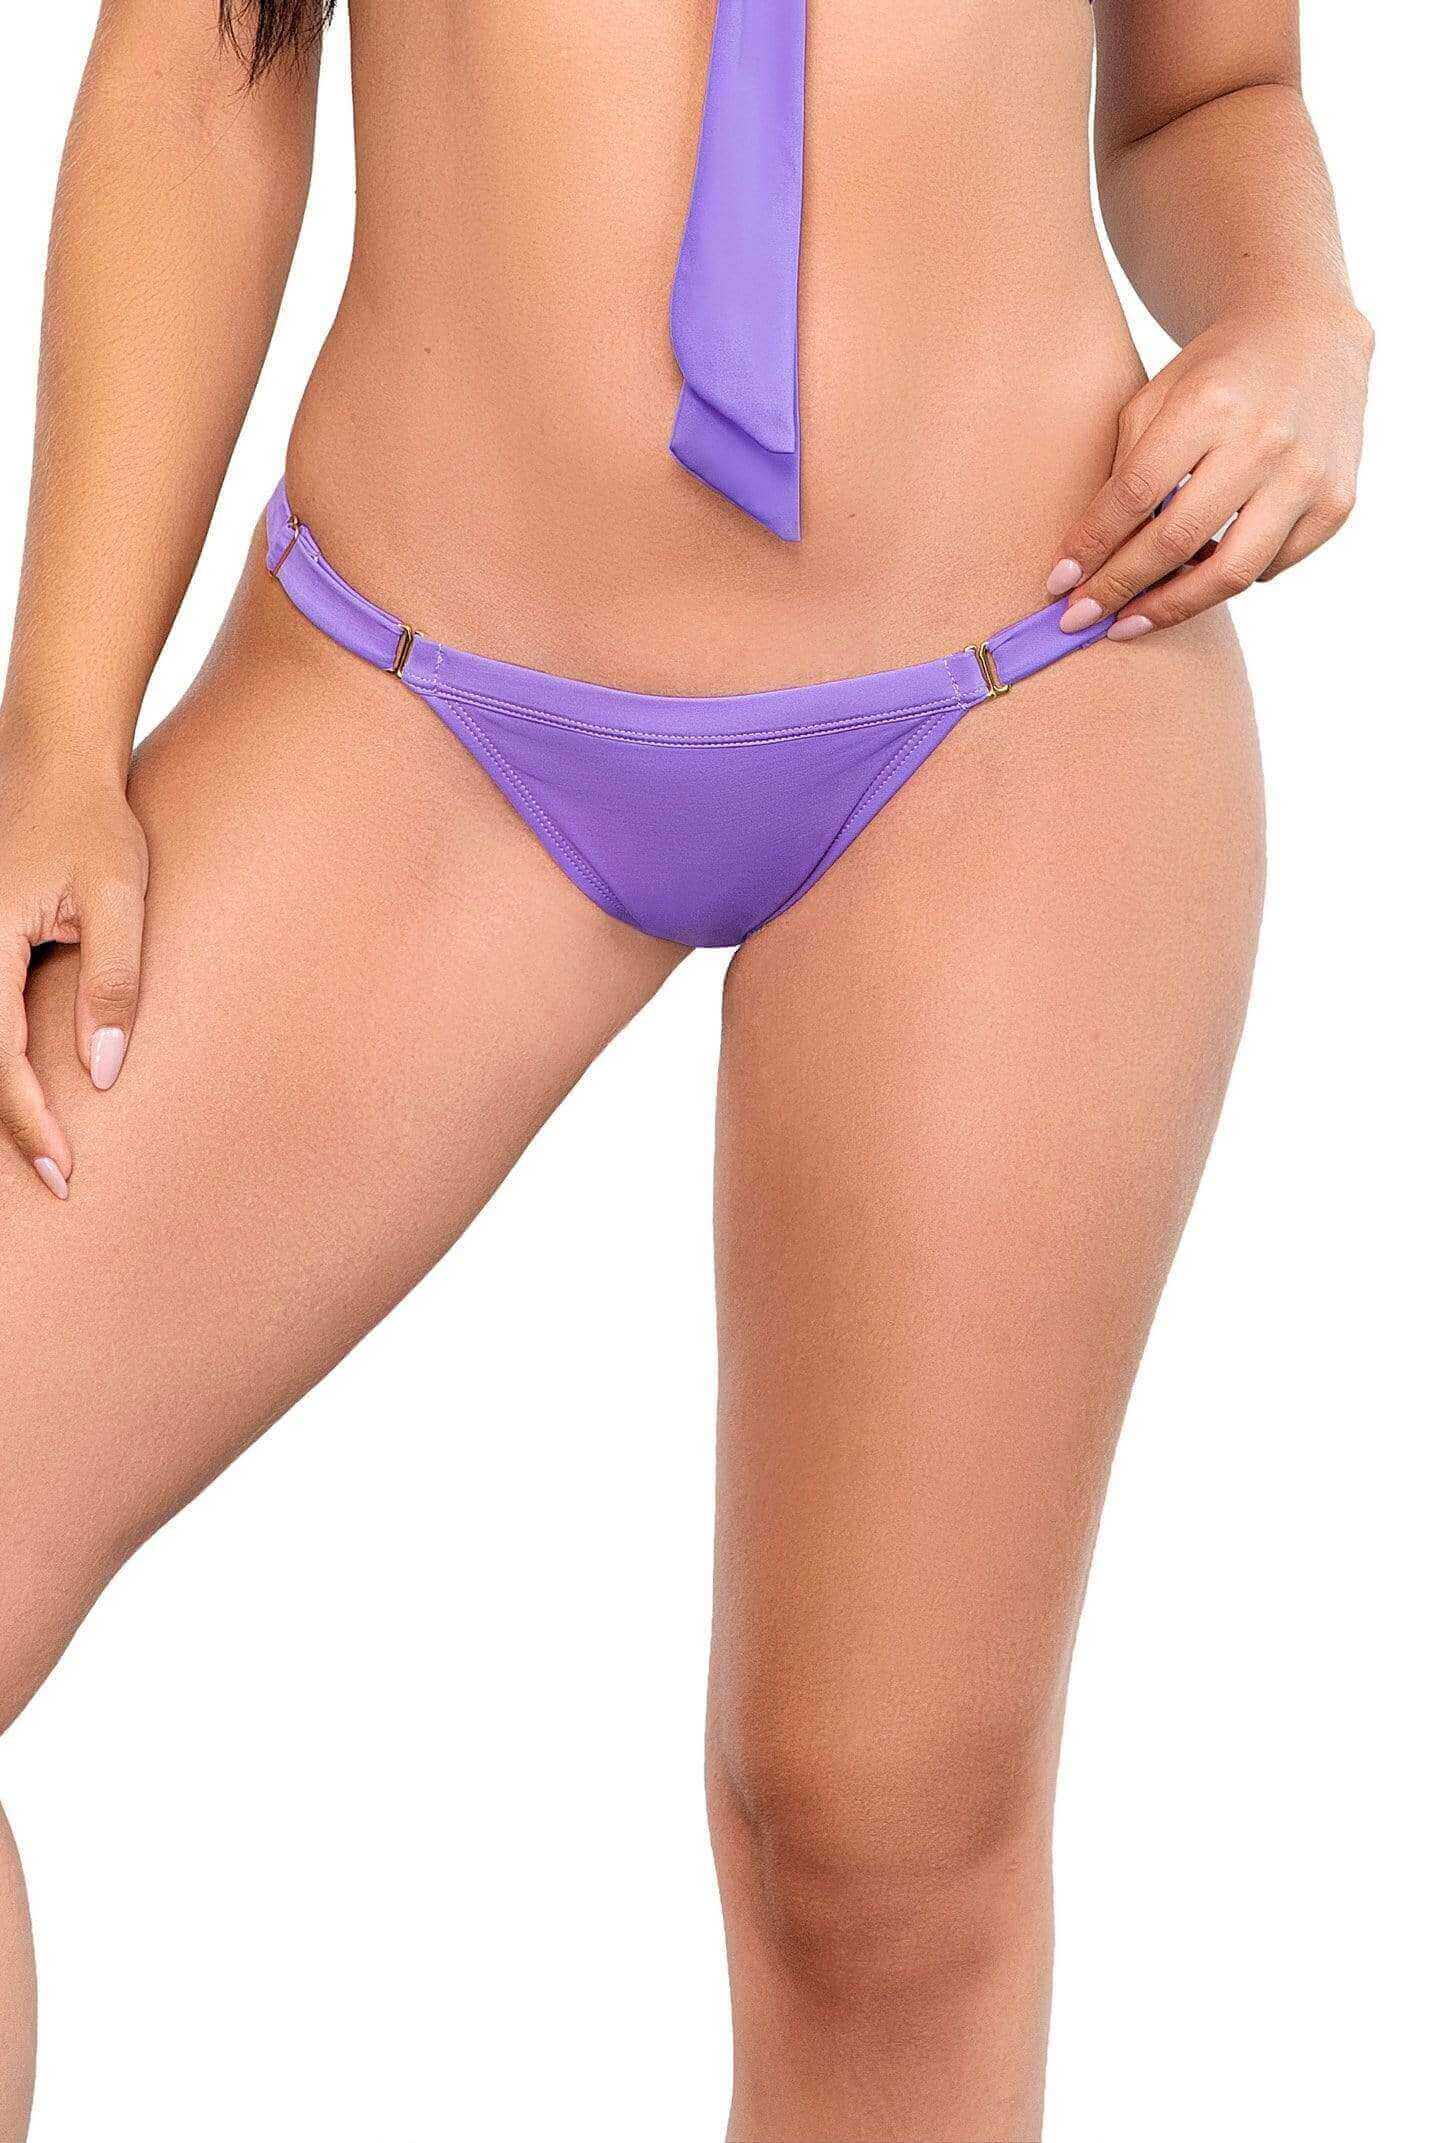 Mapale Apparel & Accessories > Clothing > Swimwear Purple / S/M Black Side Strap w/ Hook Closures Bikini Bottom Separates (Many colors available) Black Side Strap w/ Hook Closures Bikini Bottom Separates| MAPALE 6651